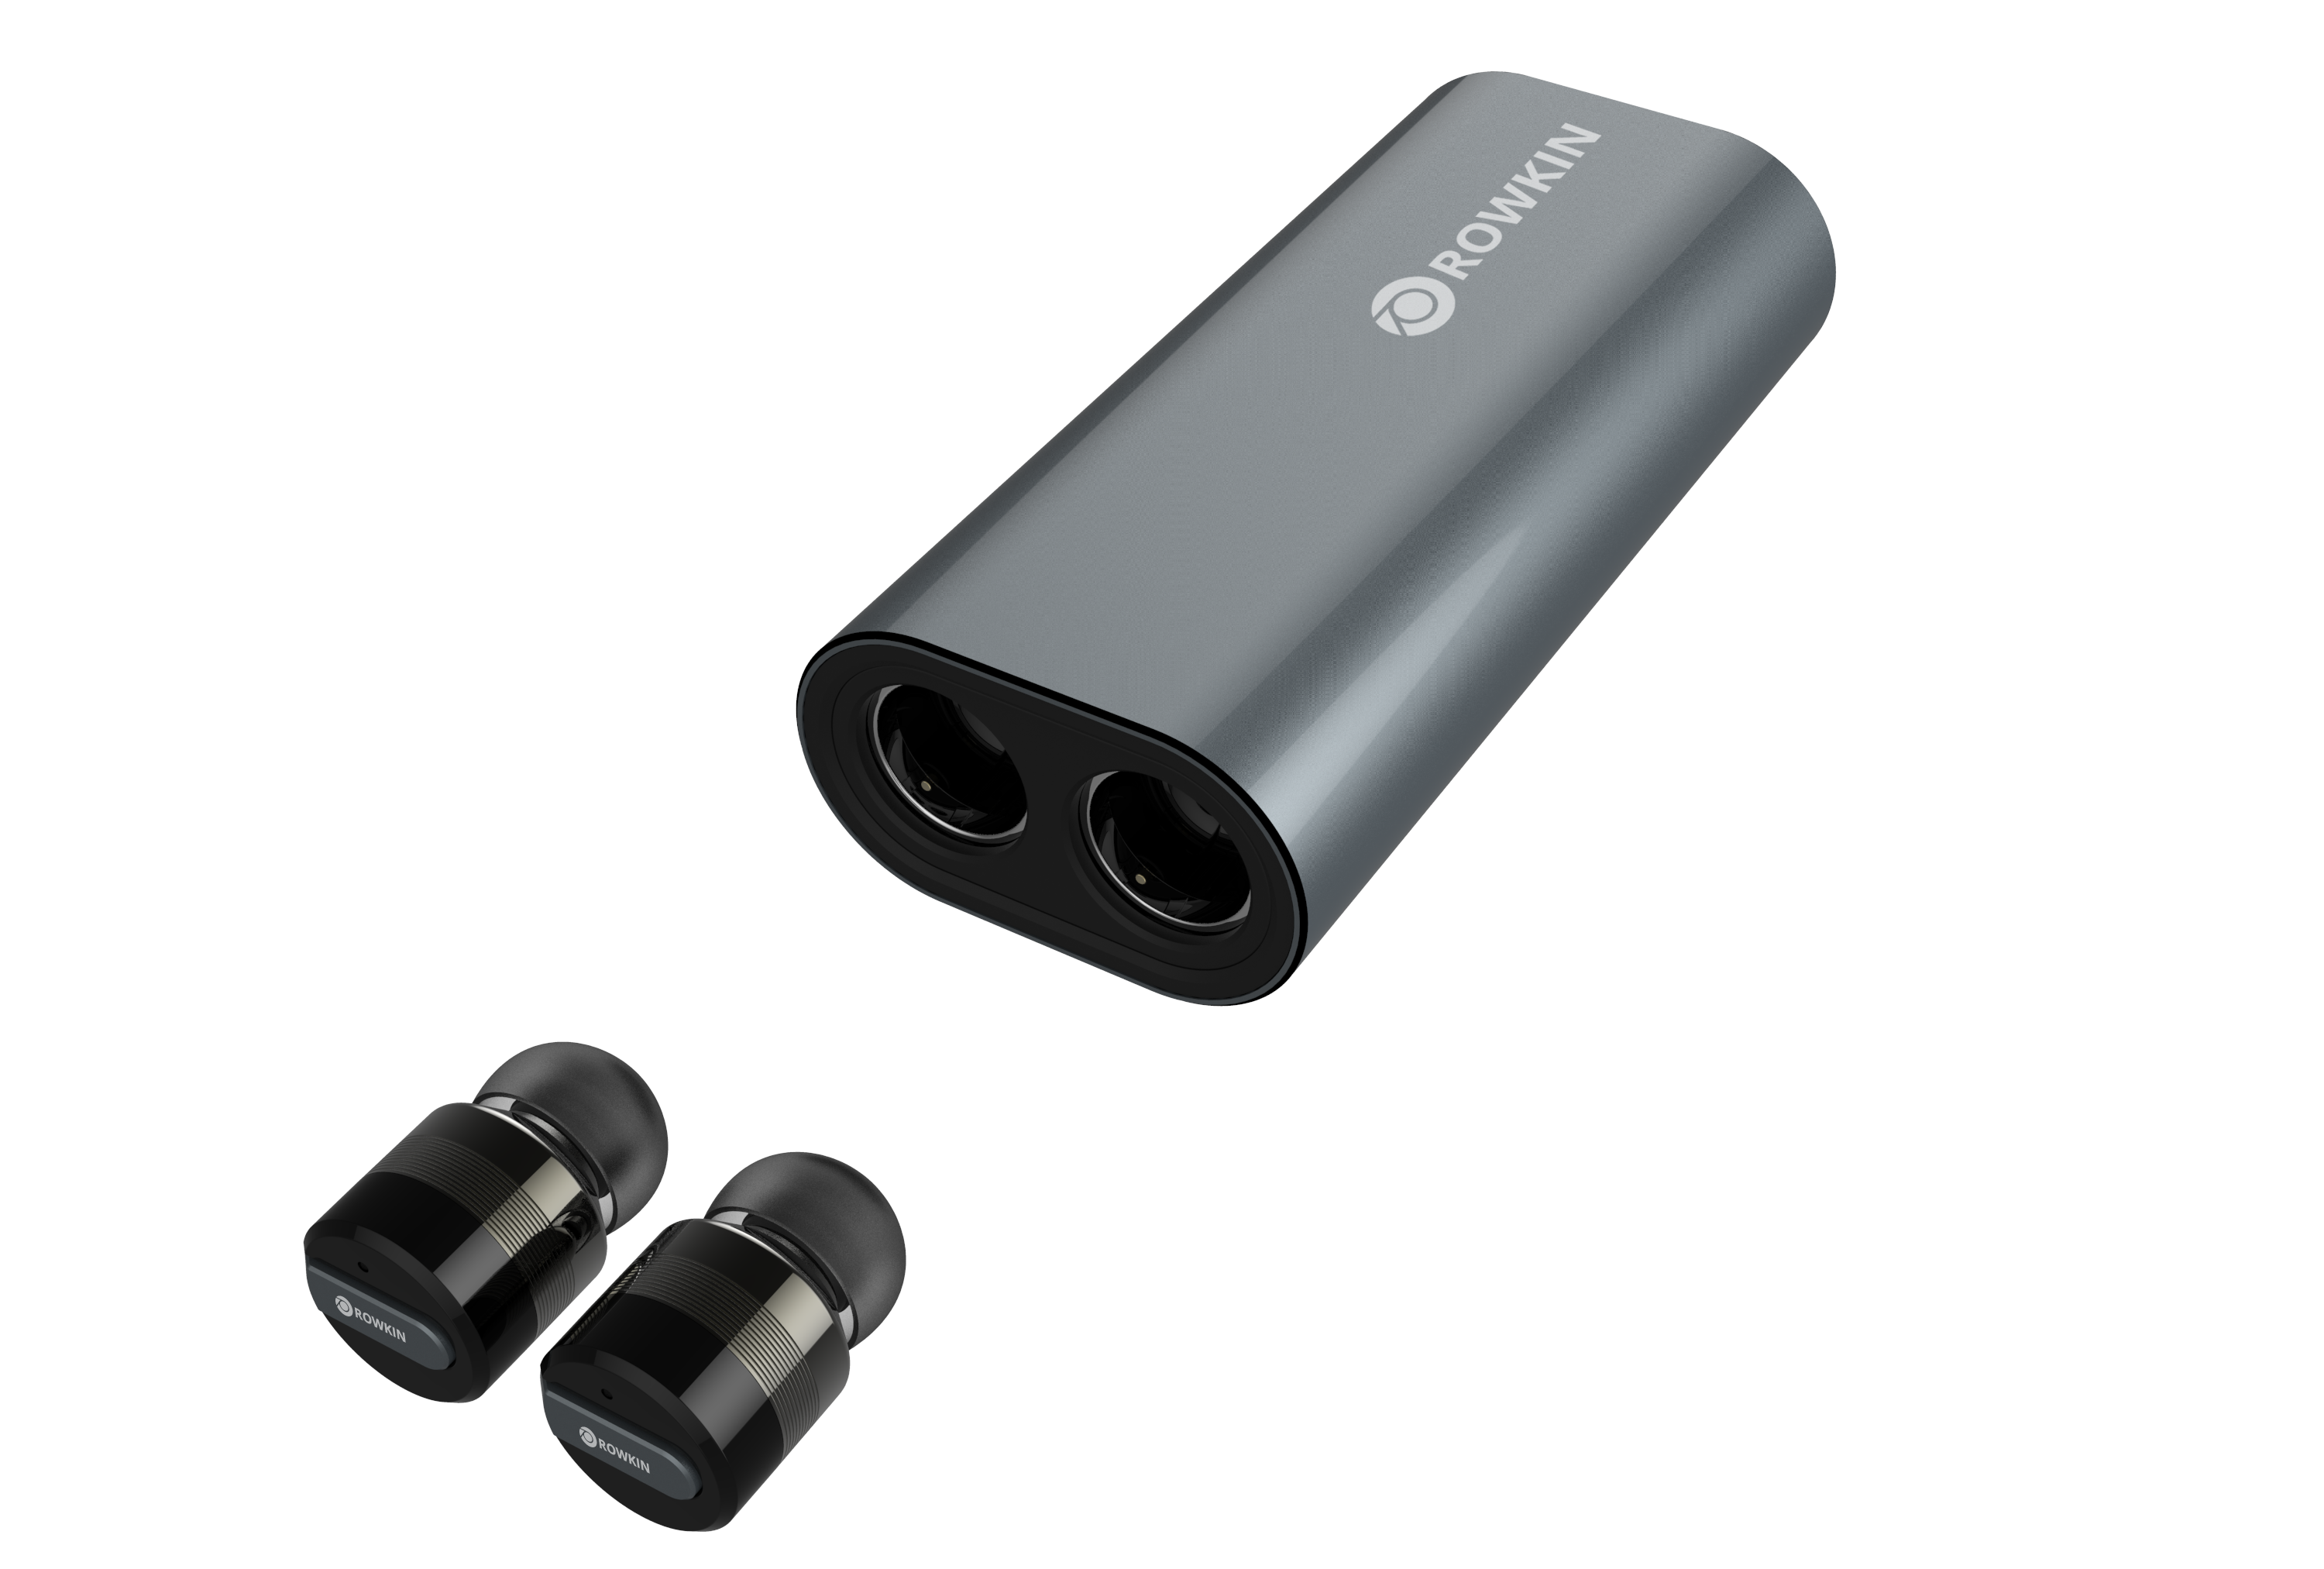 Rowkin Releases World’s Smallest Stereo Cordless Bluetooth Earbuds for